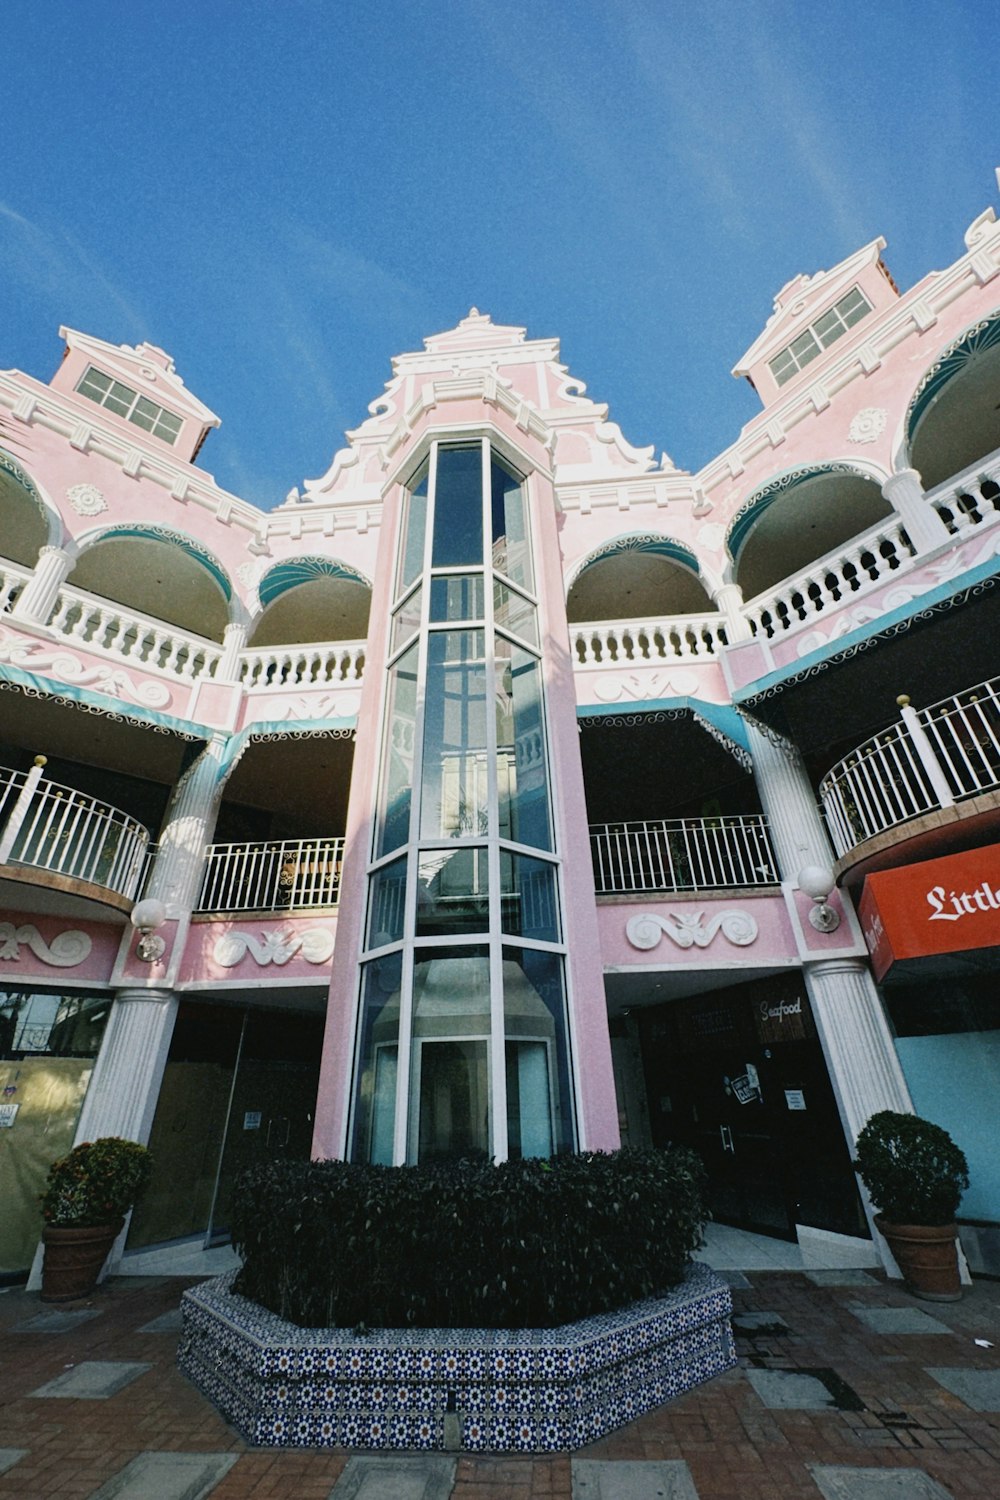 a pink and white building with balconies and balconies